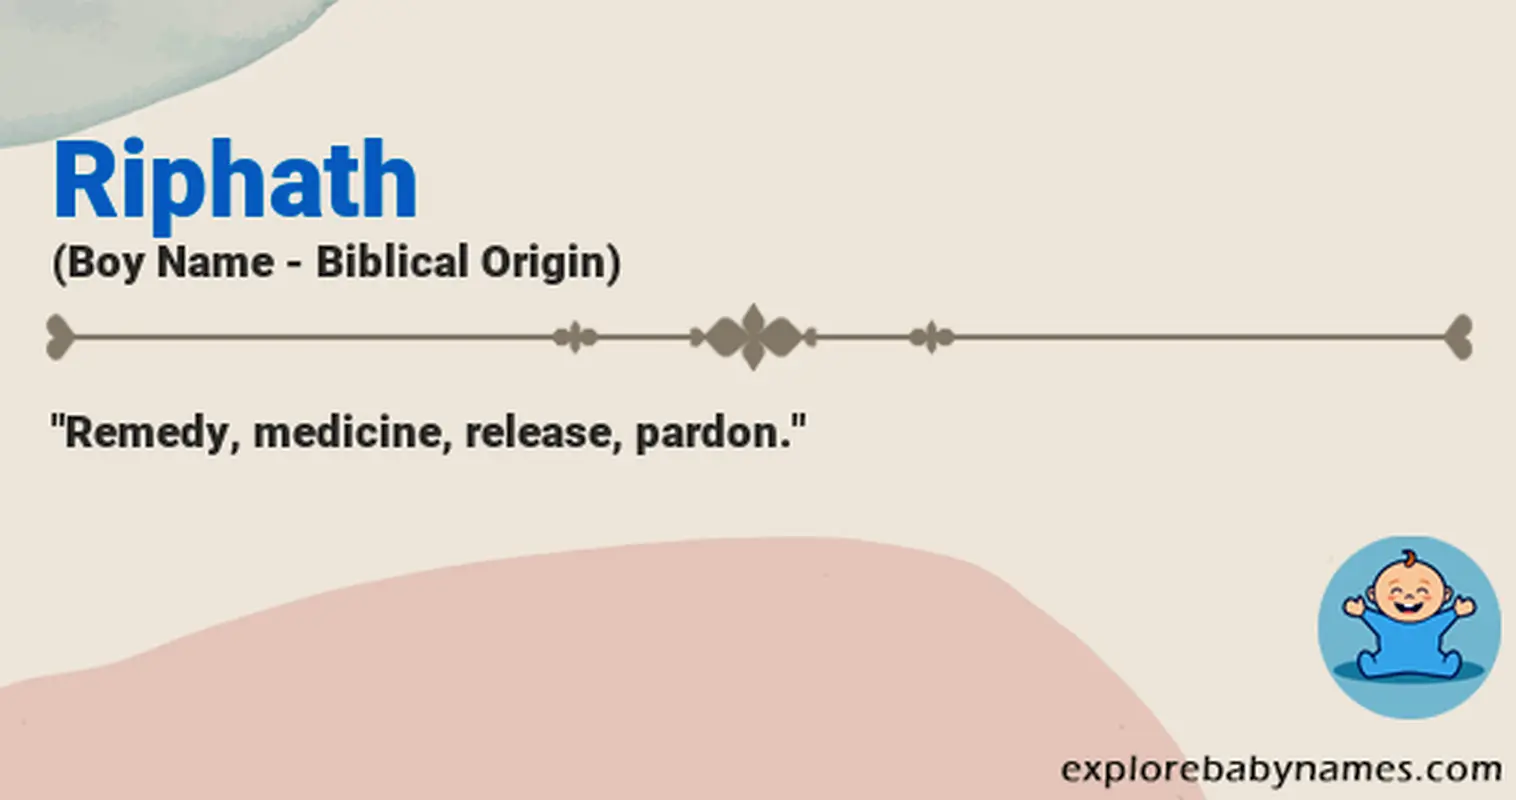 Meaning of Riphath